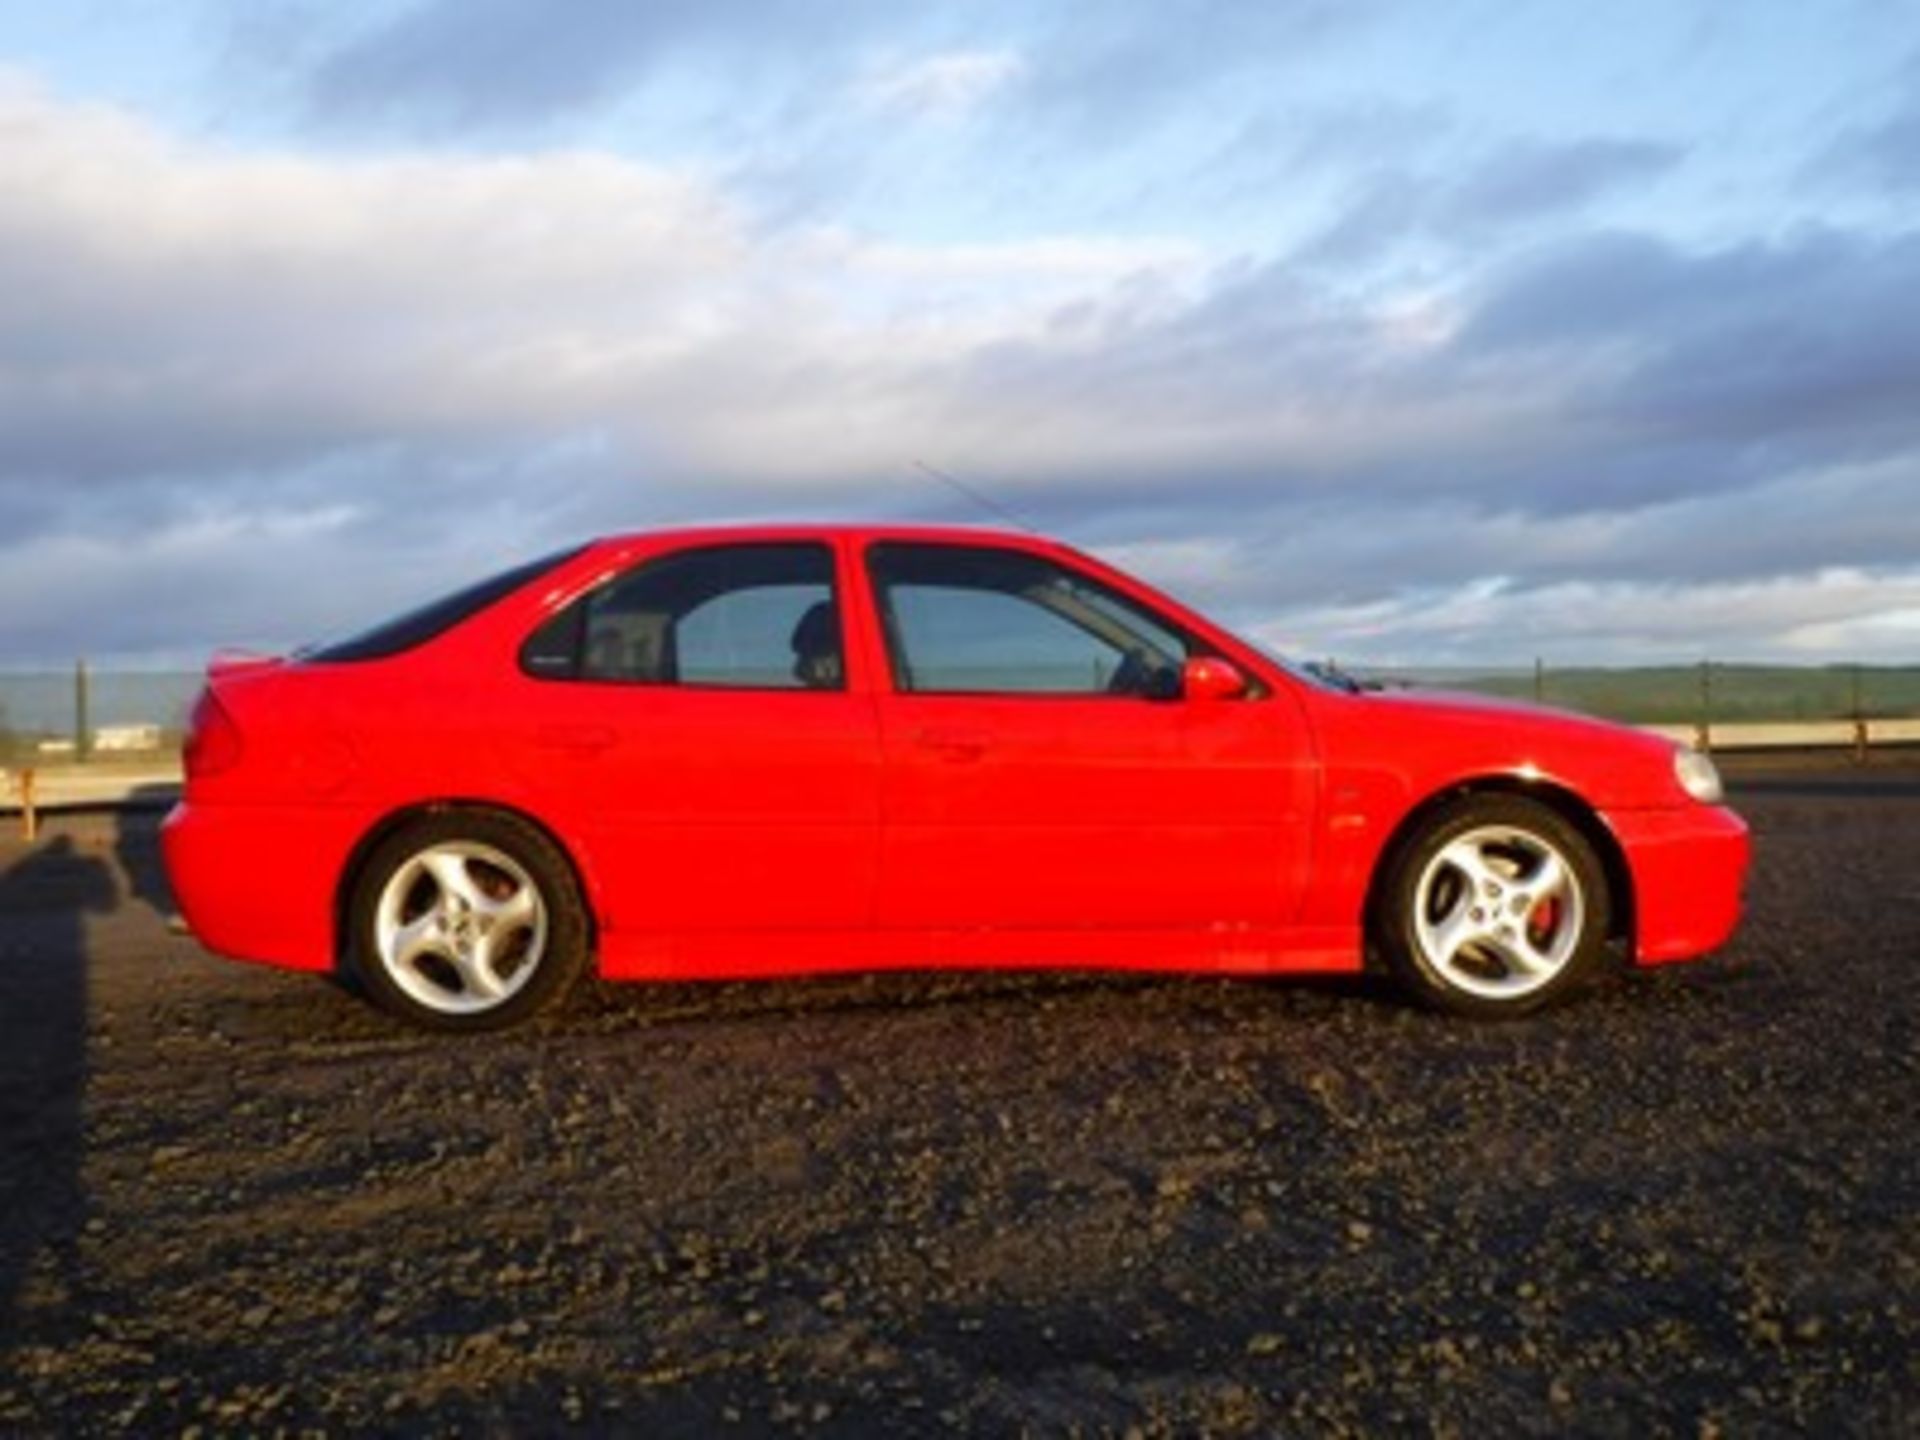 FORD MONDEO ST 24 V6 - 2497cc - Image 7 of 24